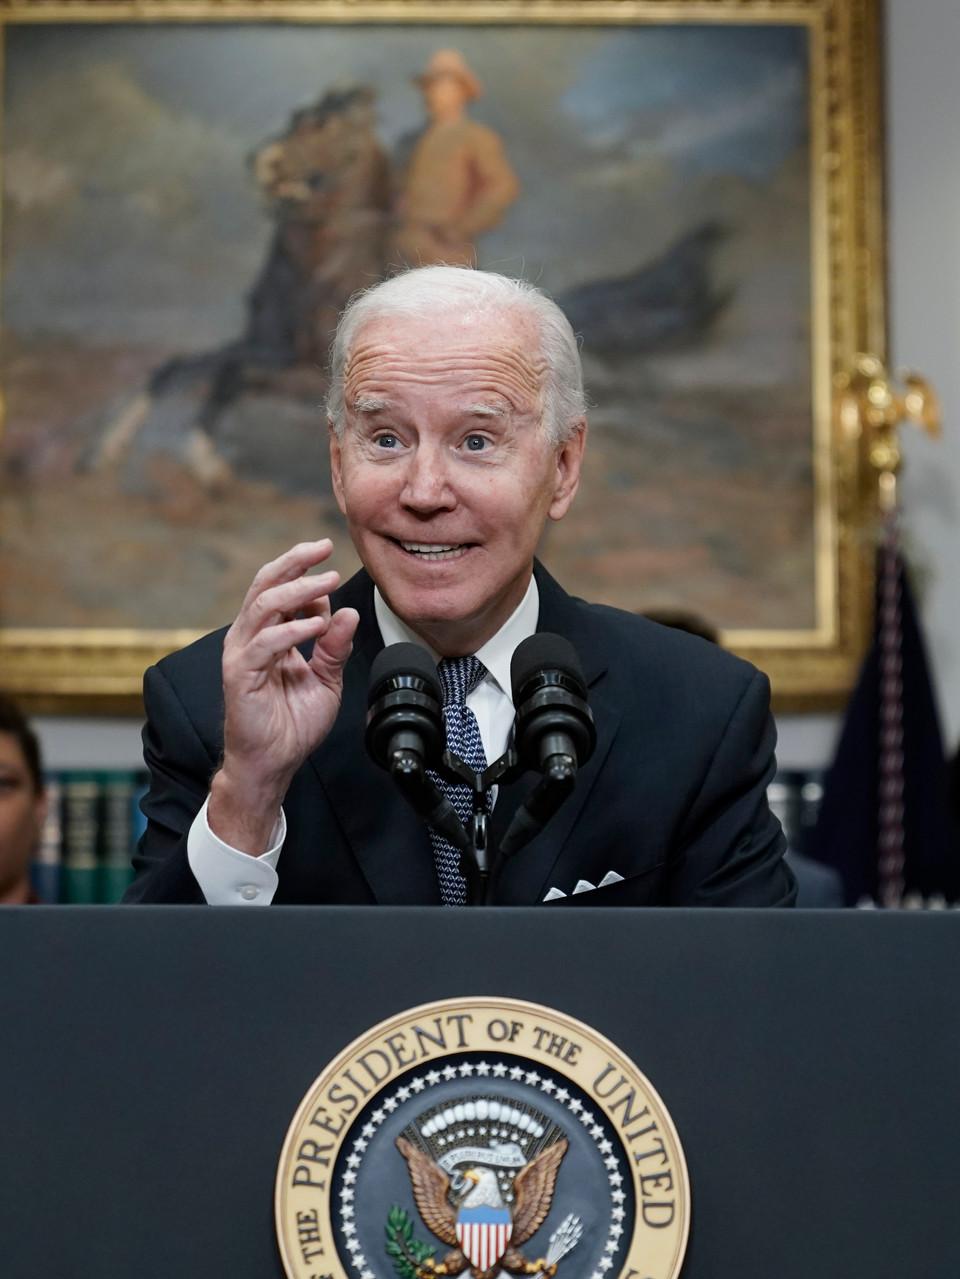 Long awkward pause from Biden during interview raises concerns